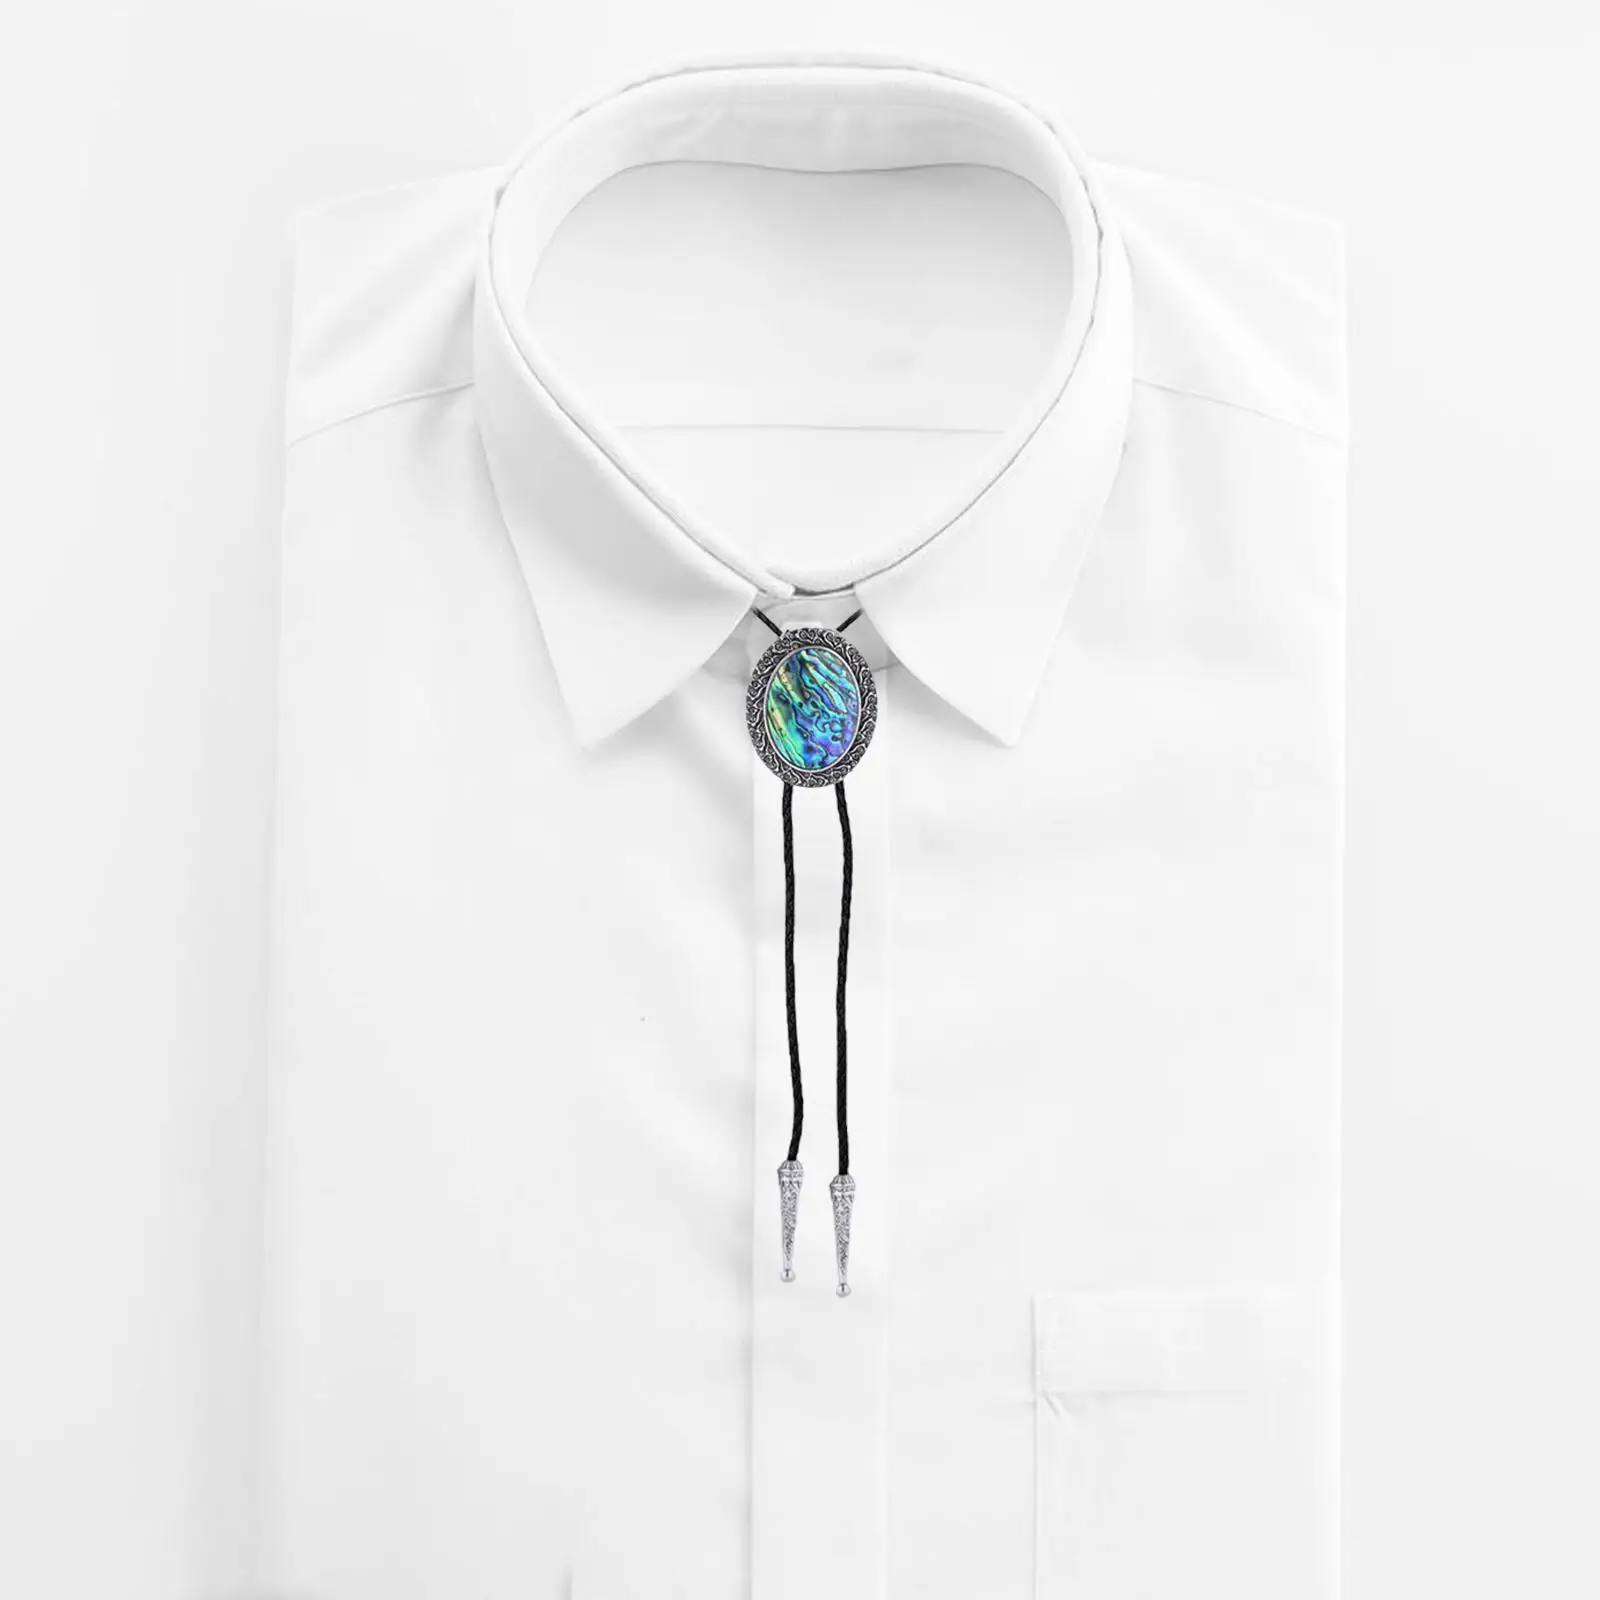 Fashion Vintage Style Bolo Tie Shirt Neck Ties Costume Accessories with Pendant for Teens Adults Women Men Birthday Gift